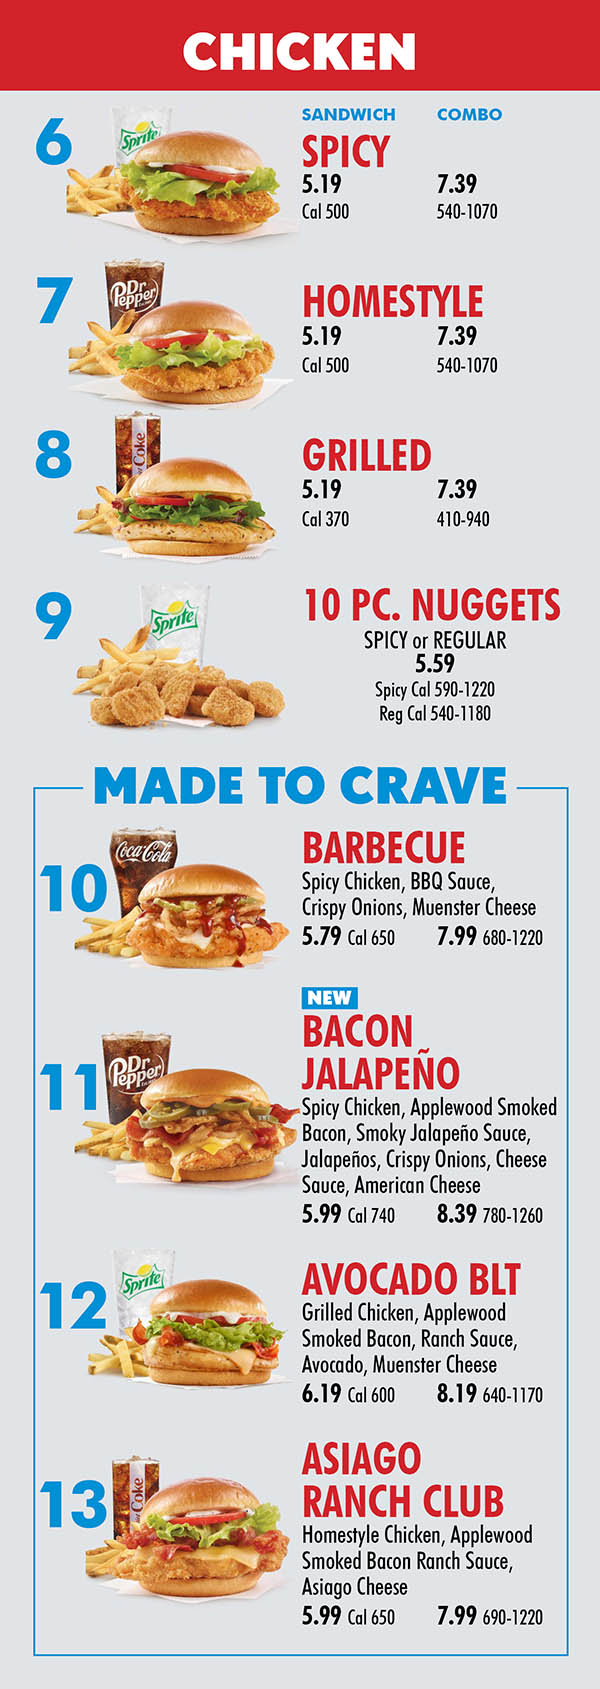 Wendy's N 48th St Lincoln NE Menu Page 2
CHICKEN
6
MADE TO CRAVE
10
11
12
7
8
SANDWICH COMBO
SPICY
5.19 7.39
Cal 500 540-1070
HOMESTYLE
5.19 7.39
Cal 500 540-1070
GRILLED
5.19 7.39
Cal 370 410-940
10 PC. NUGGETS
SPICY or REGULAR
5.59
Spicy Cal 590-1220
Reg Cal 540-1180
BARBECUE
Spicy Chicken, BBQ Sauce,
Crispy Onions, Muenster Cheese
5.79 Cal 650 7.99 680-1220
BACON
JALAPEÑO
Spicy Chicken, Applewood Smoked Bacon, Smoky Jalapeño Sauce, Jalapeños, Crispy Onions, Cheese Sauce, American Cheese
5.99 Cal 740 8.39 780-1260
AVOCADO BLT
Grilled Chicken, Applewood
Smoked Bacon, Ranch Sauce,
Avocado, Muenster Cheese
6.19 Cal 600 8.19 640-1170
ASIAGO
RANCH CLUB
Homestyle Chicken, Applewood
Smoked Bacon Ranch Sauce,
Asiago Cheese
5.99 Cal 650 7.99 690-1220